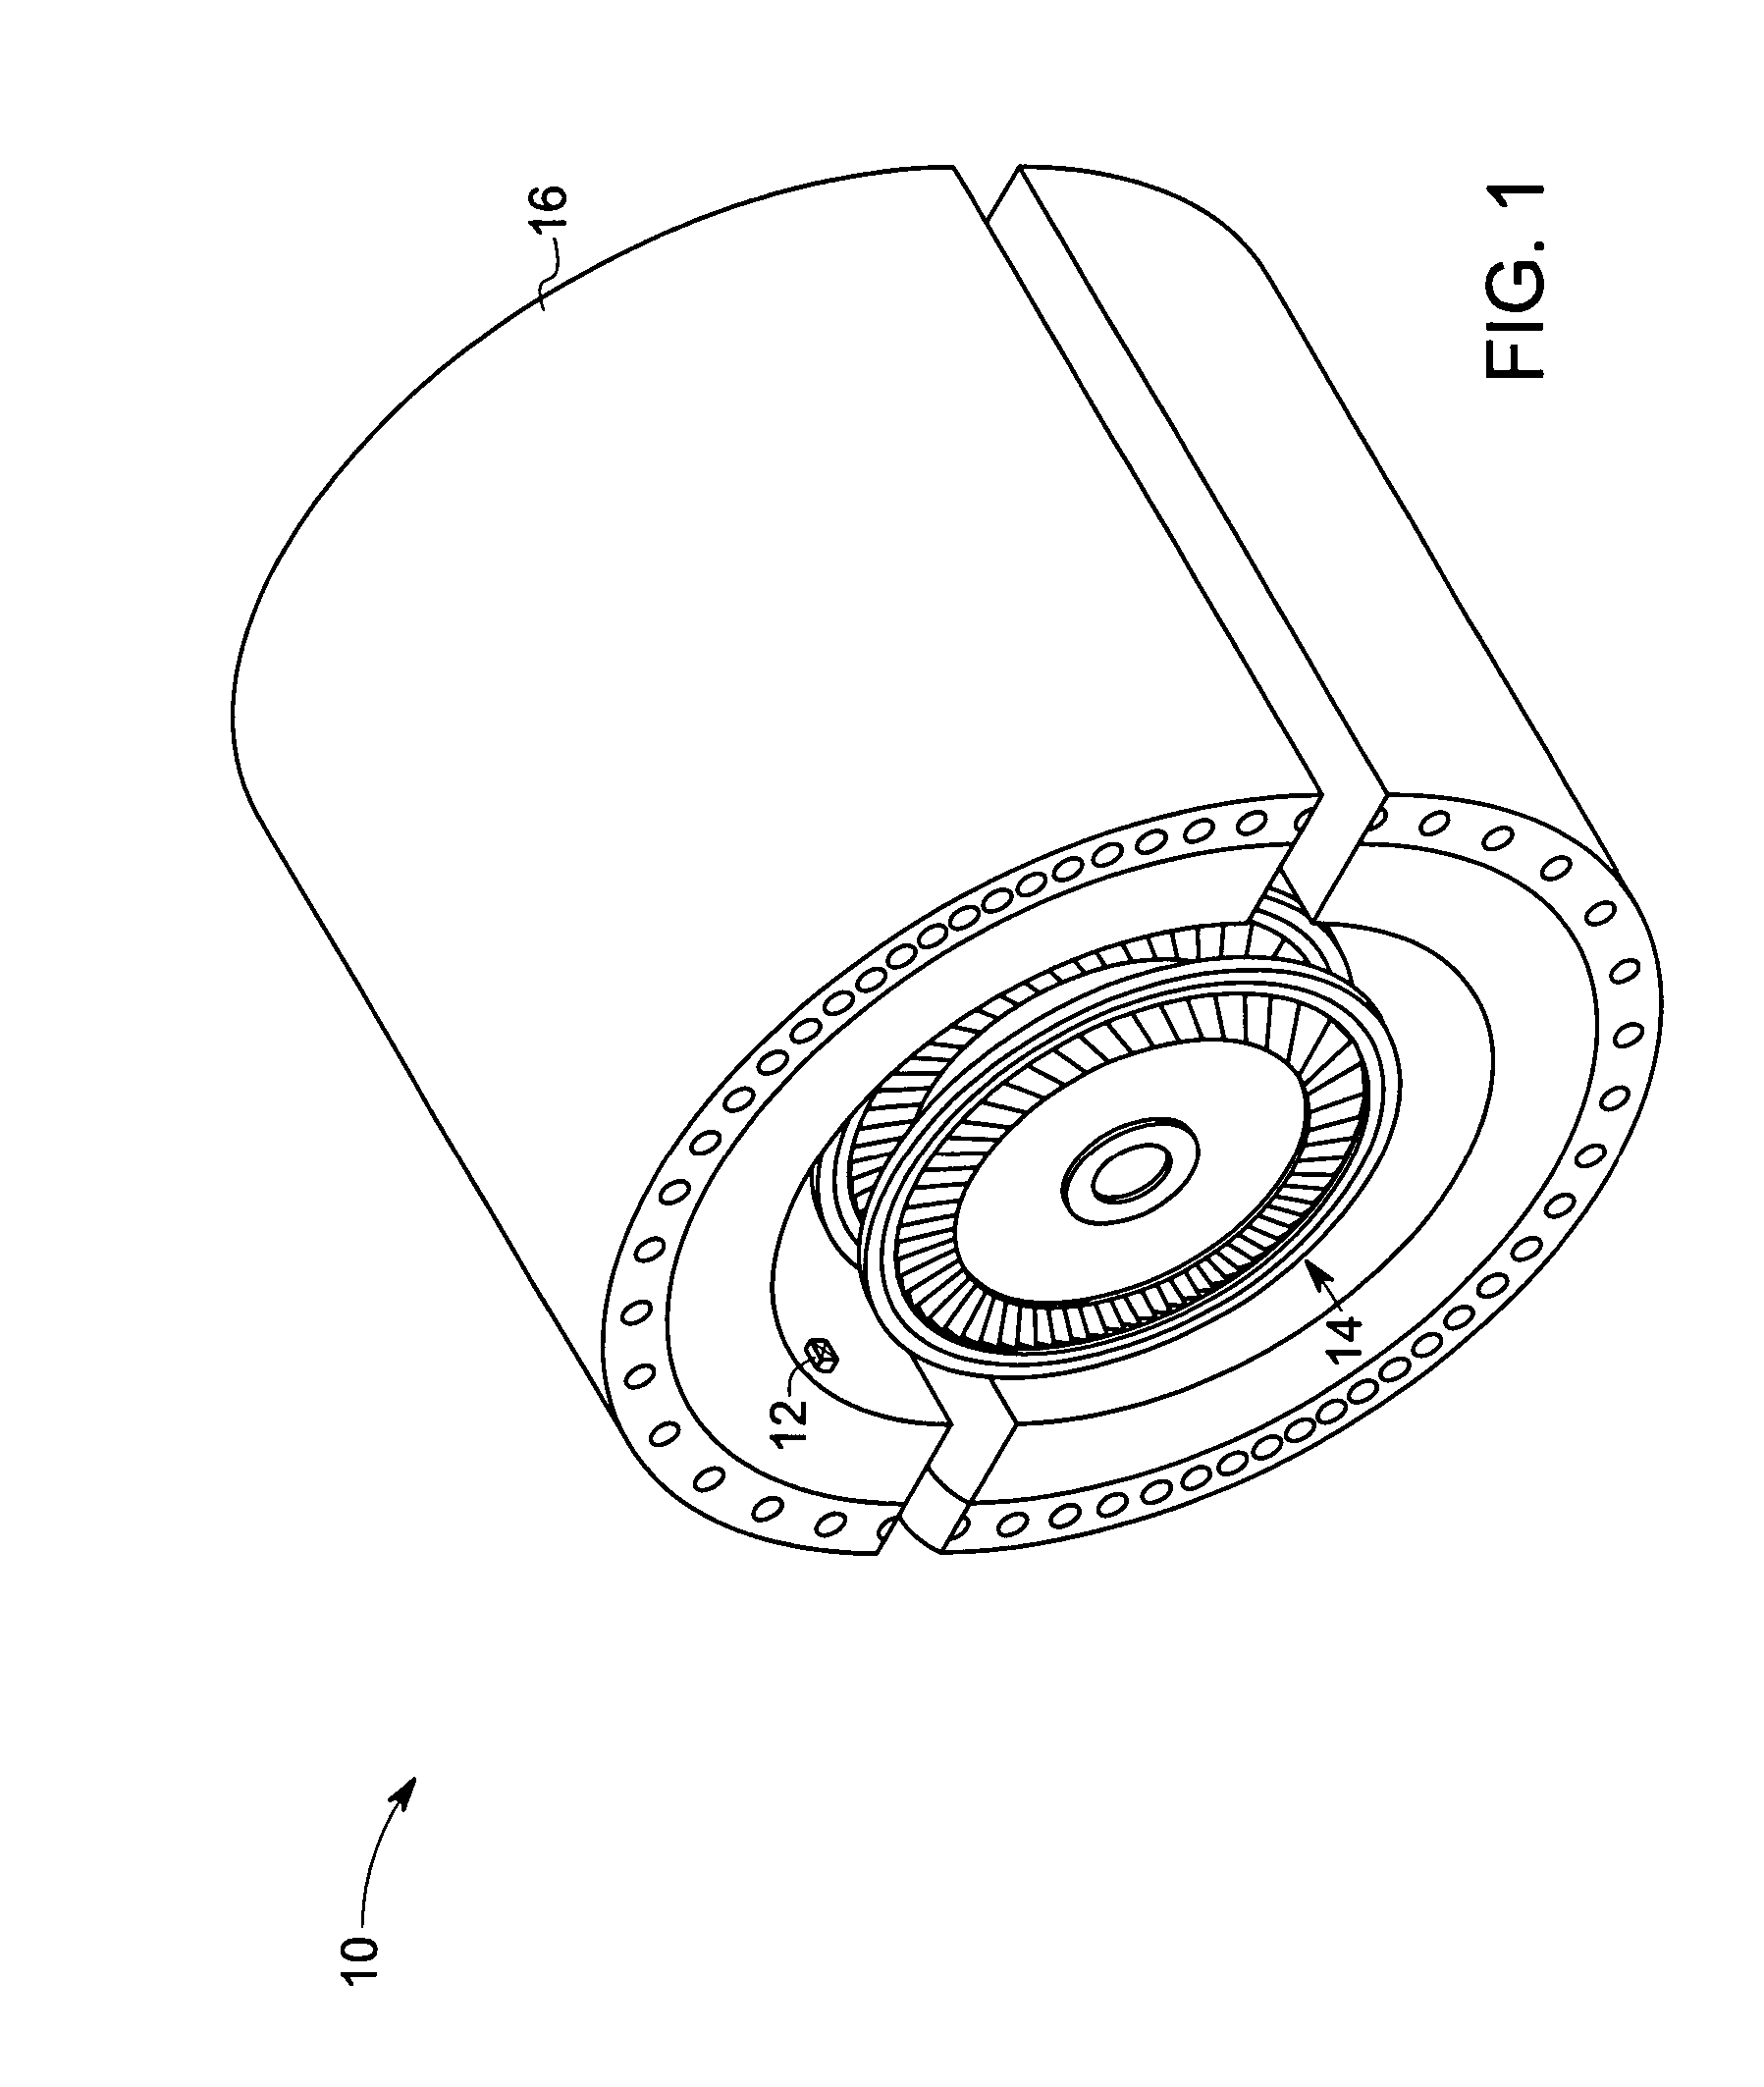 Clearance measurement system and method of operation